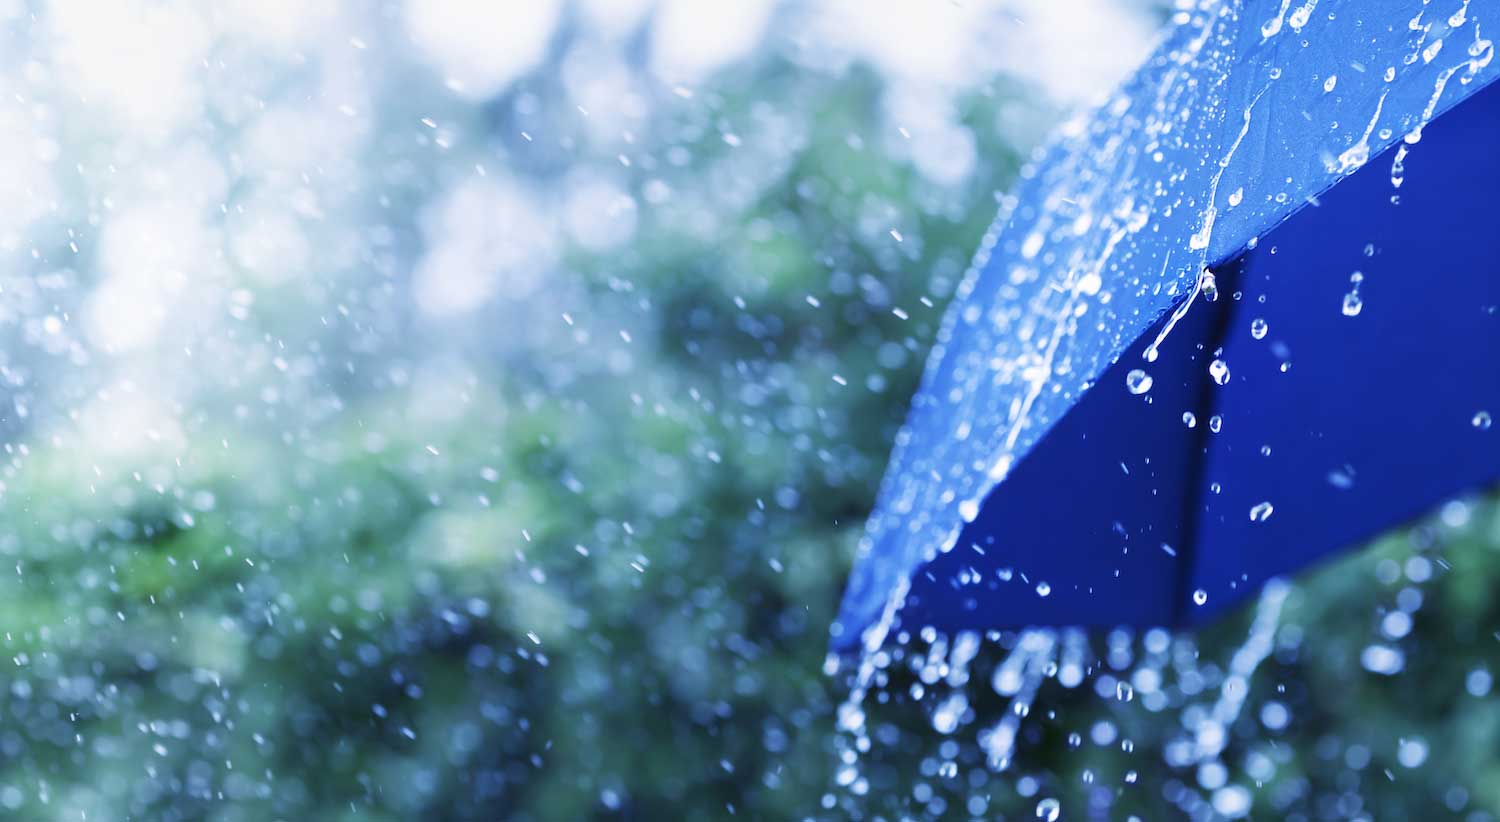 A blue umbrella with rain pouring off of it.